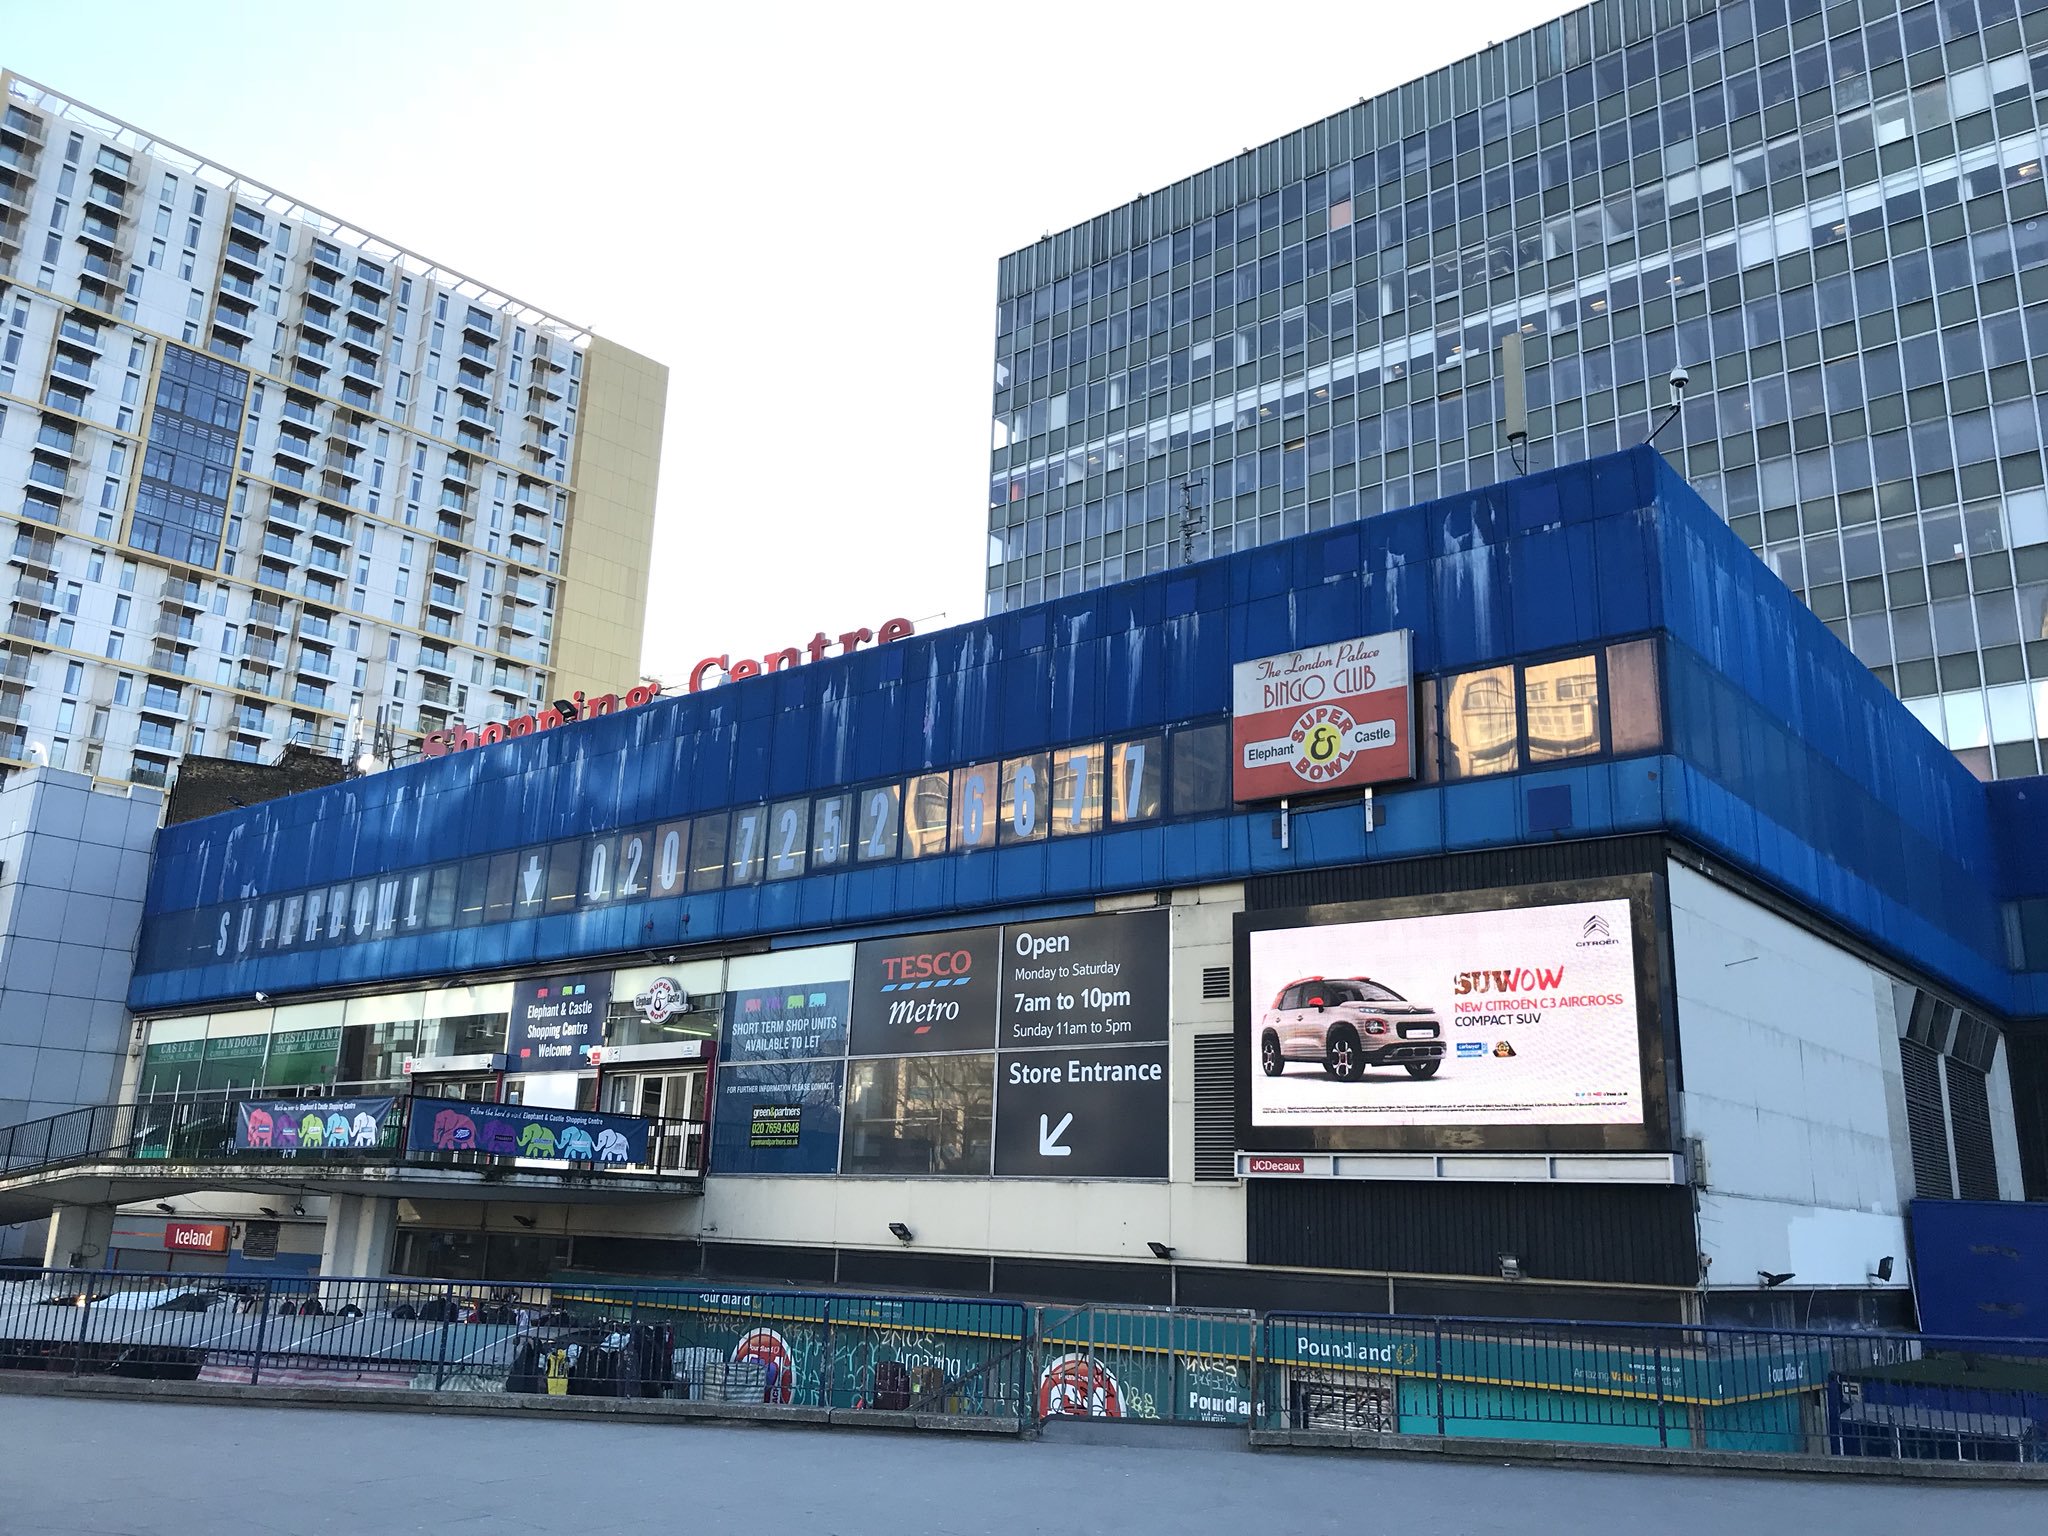 Elephant & Castle Shopping Centre: bid made for listed status